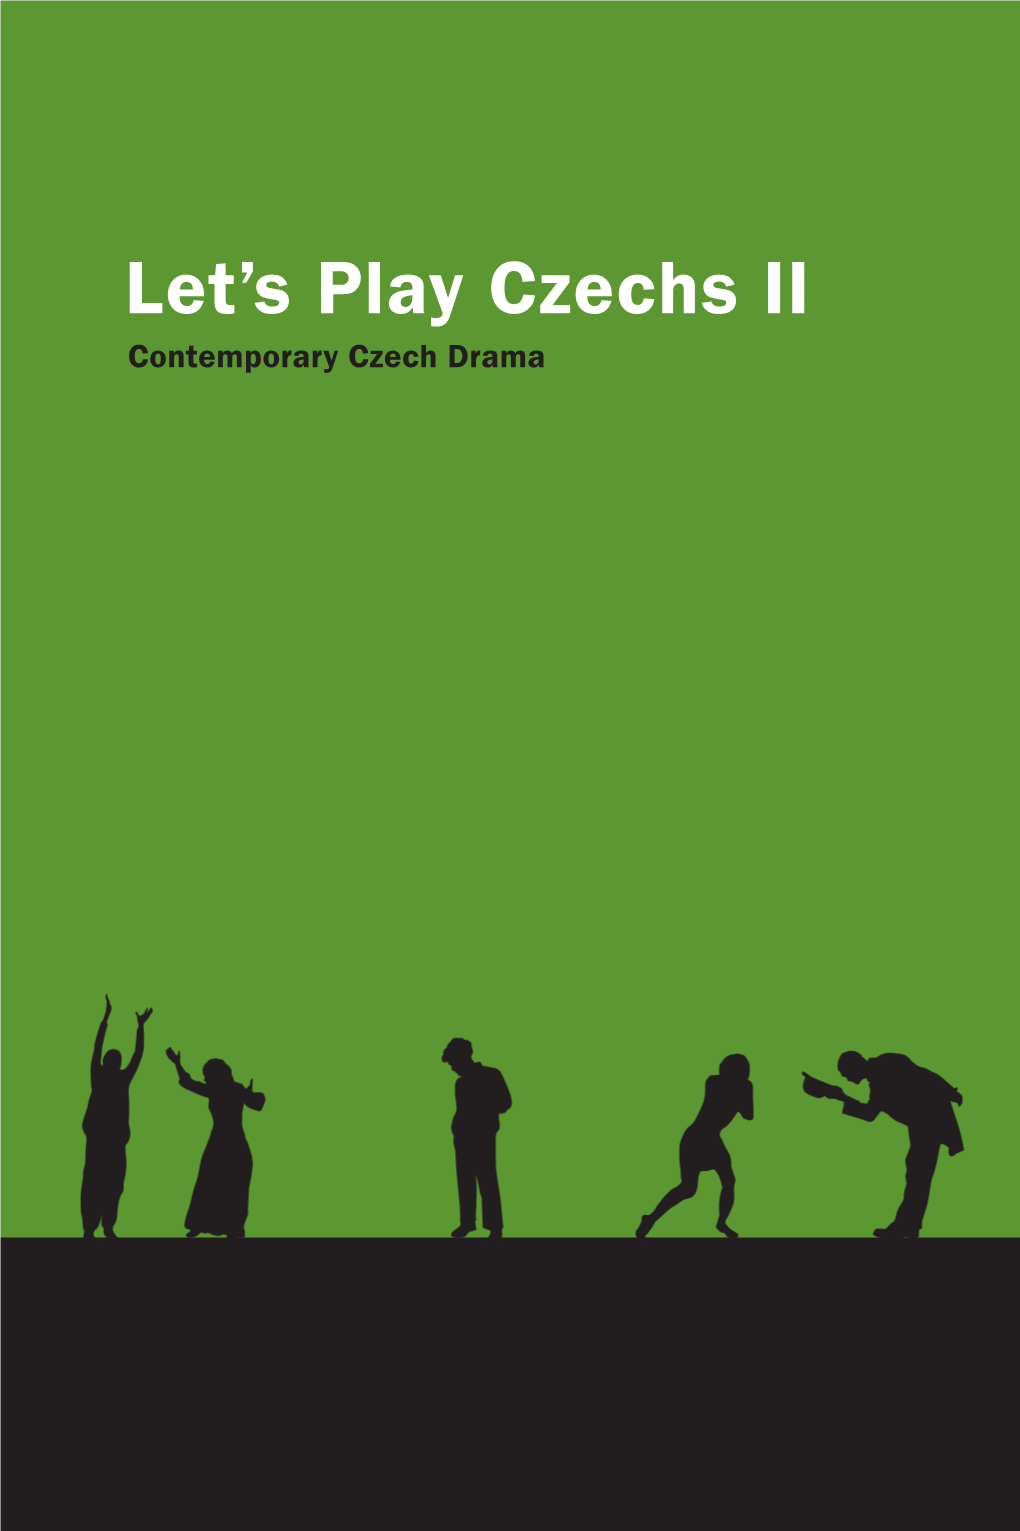 Download the Catalogue of Selected New Czech Plays